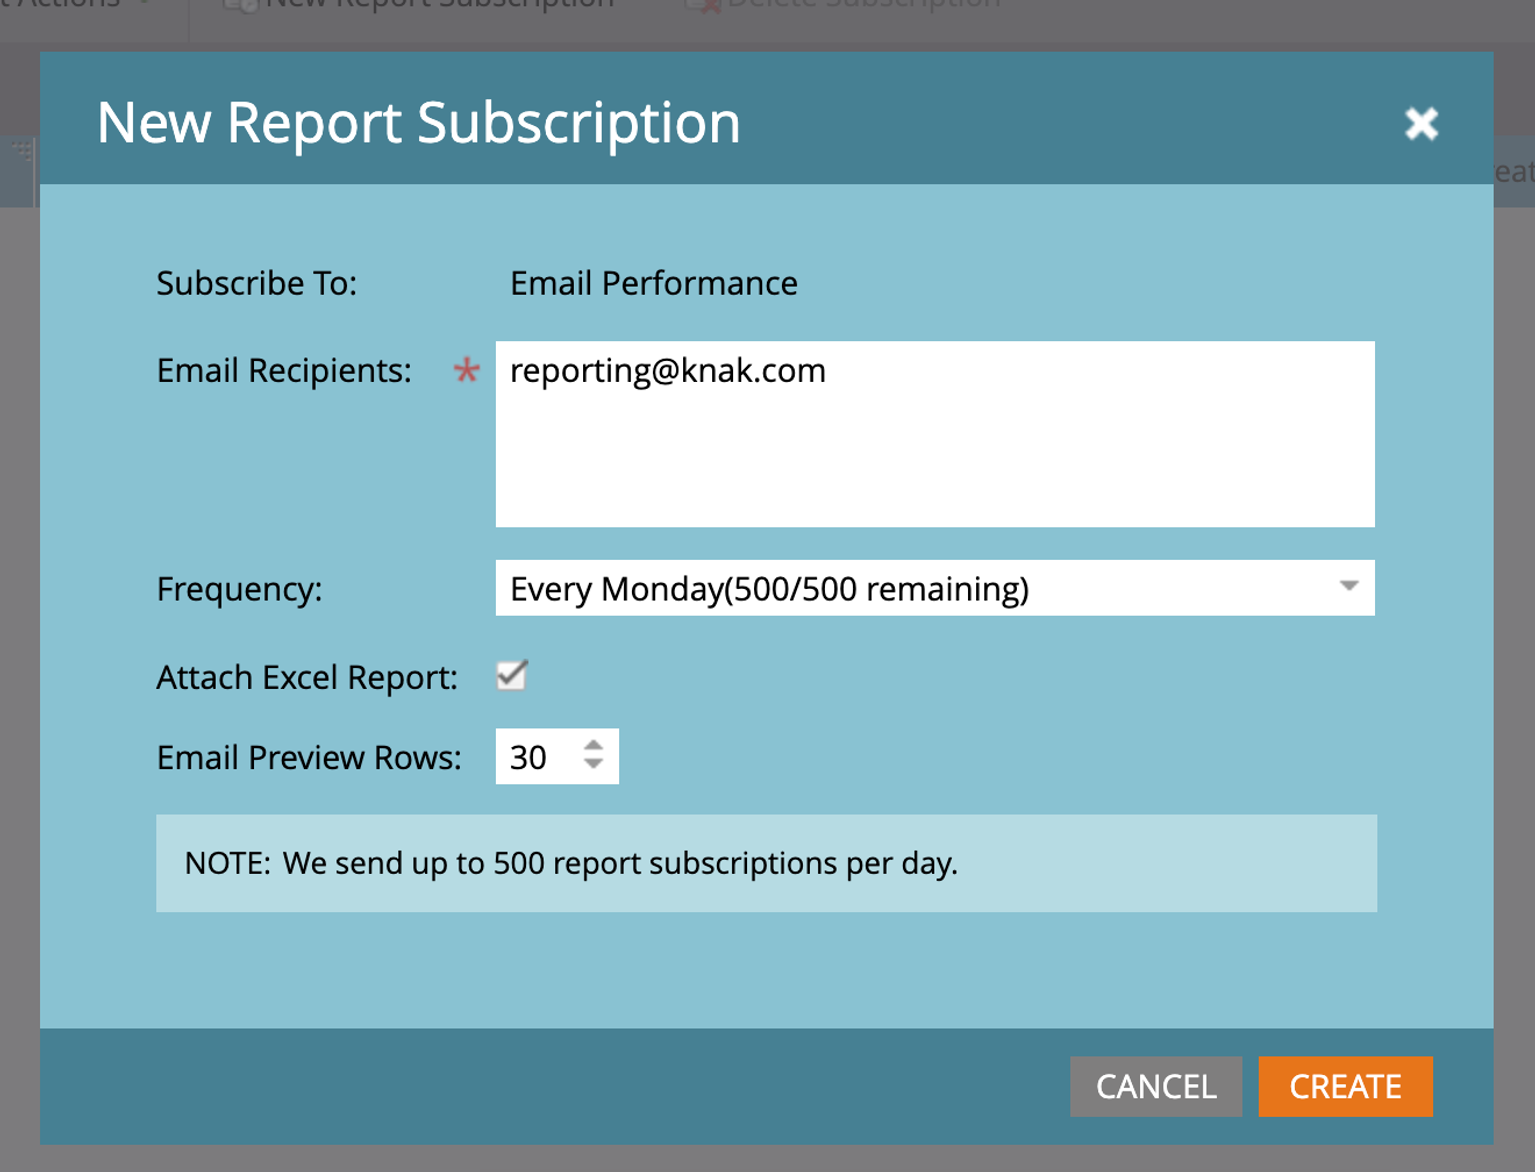 Automating Marketo email reports through subscriptions